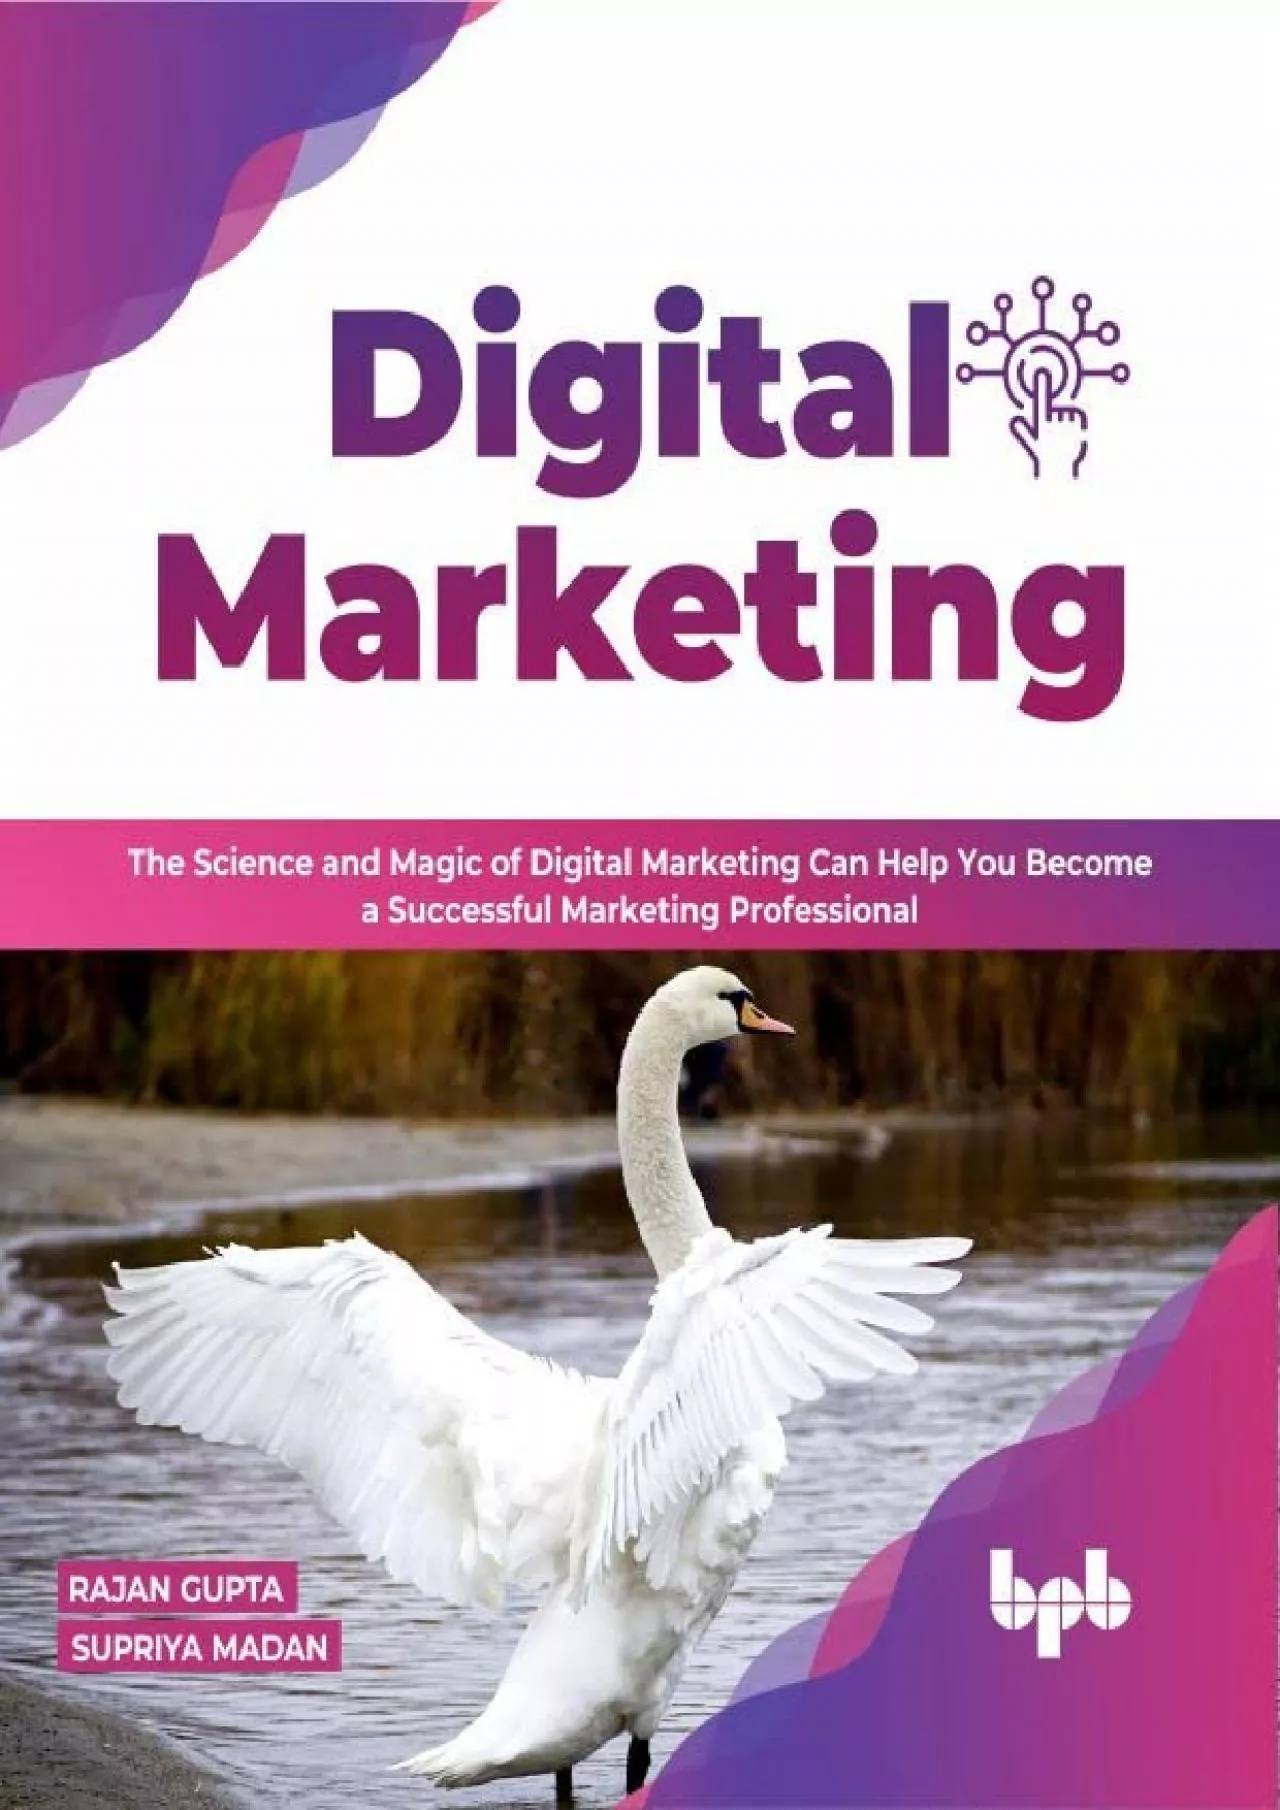 Digital Marketing: The Science and Magic of Digital Marketing Can Help You Become a Successful